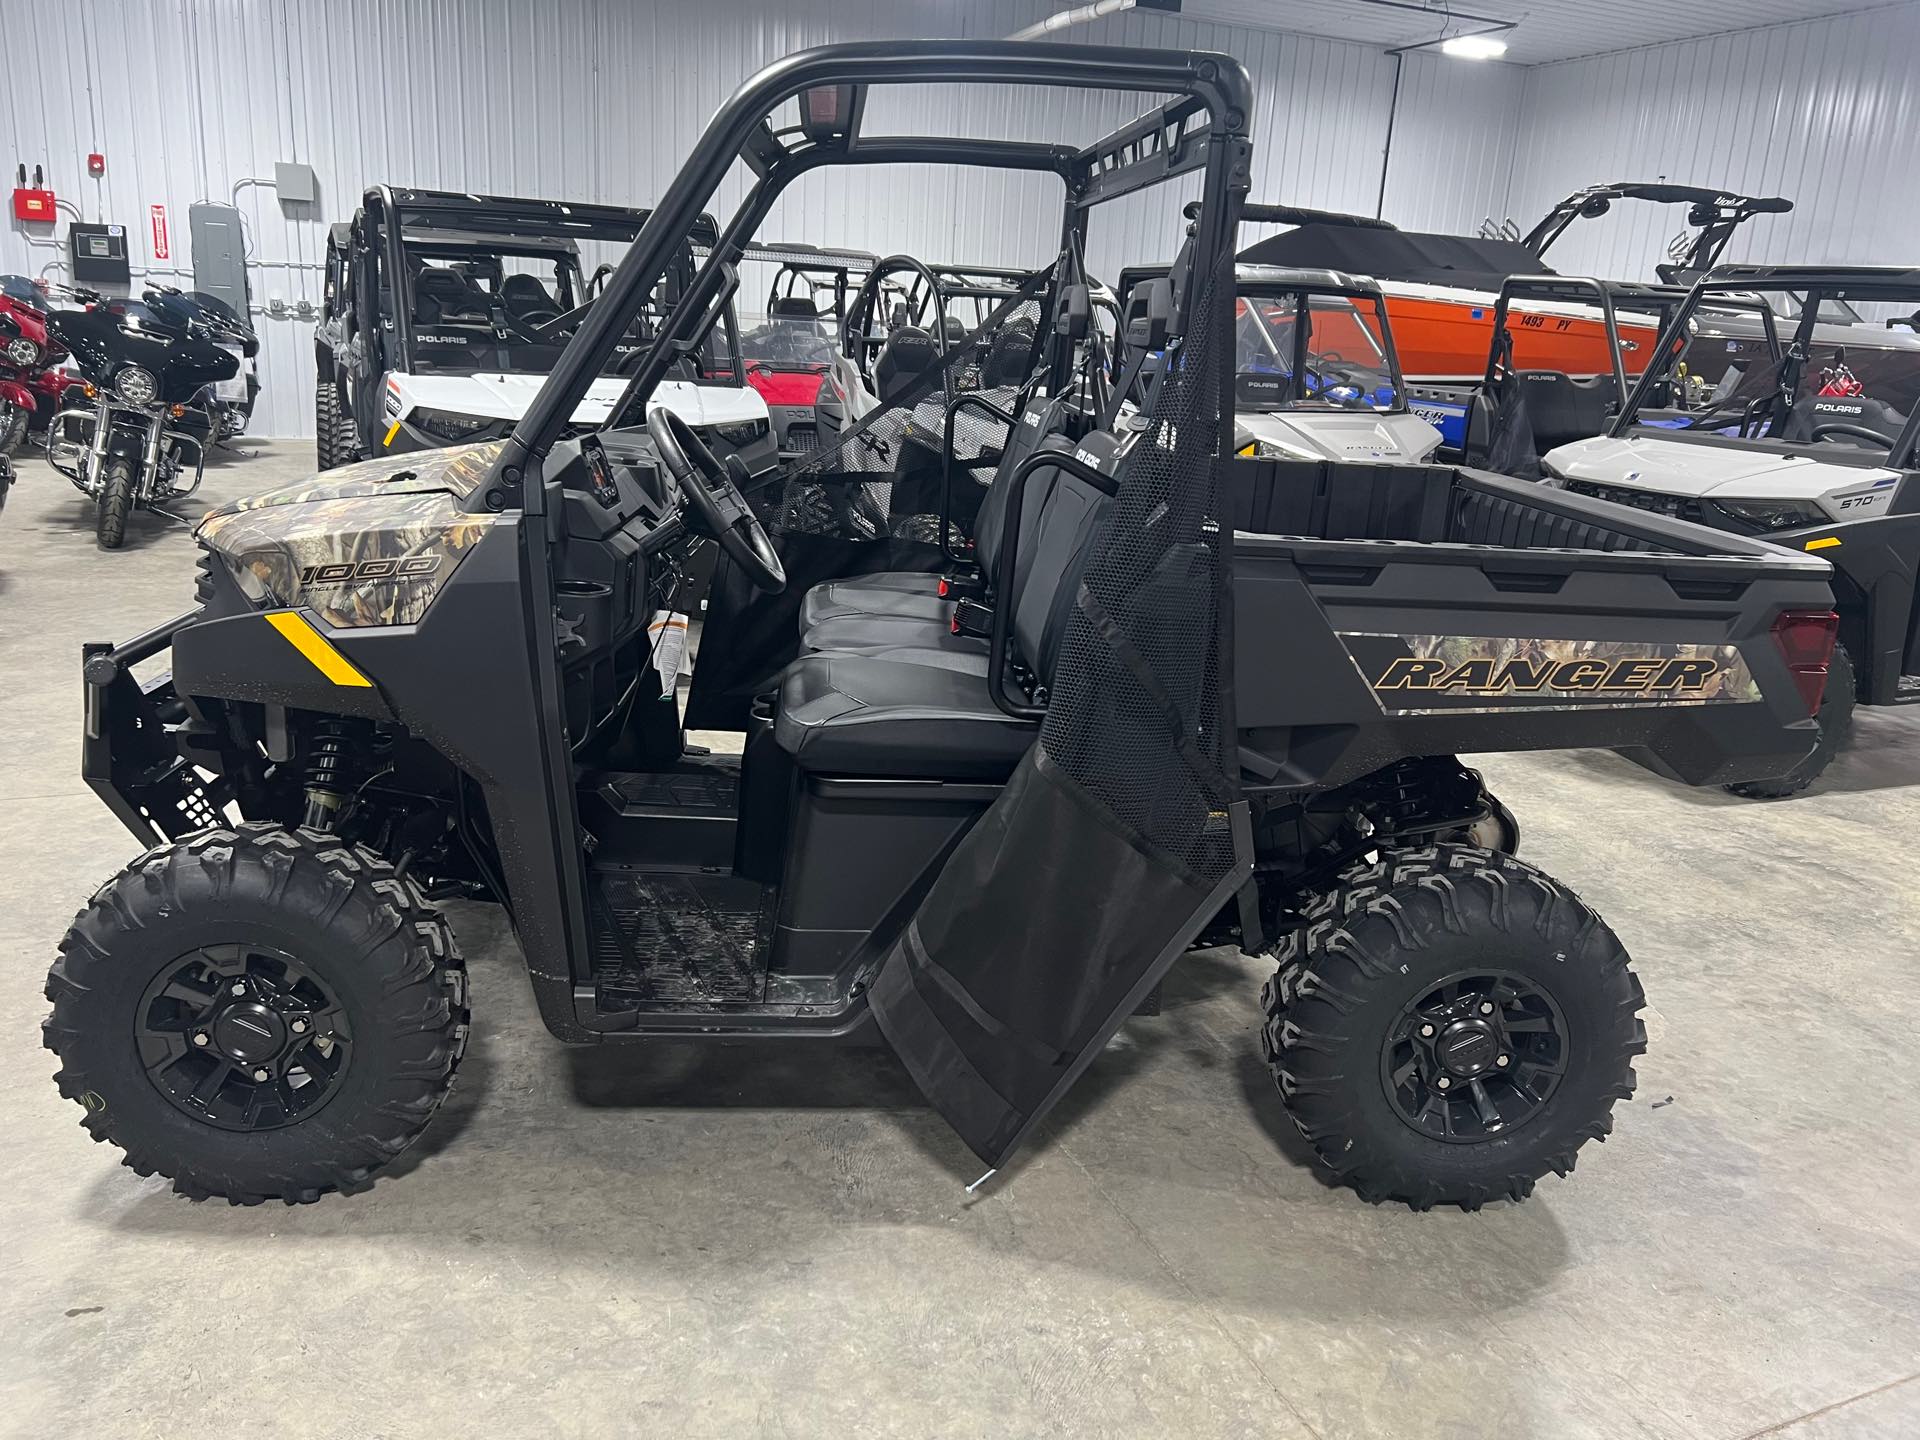 Iron Hill Powersports Waukon IA Featuring New Pre Owned Polaris 